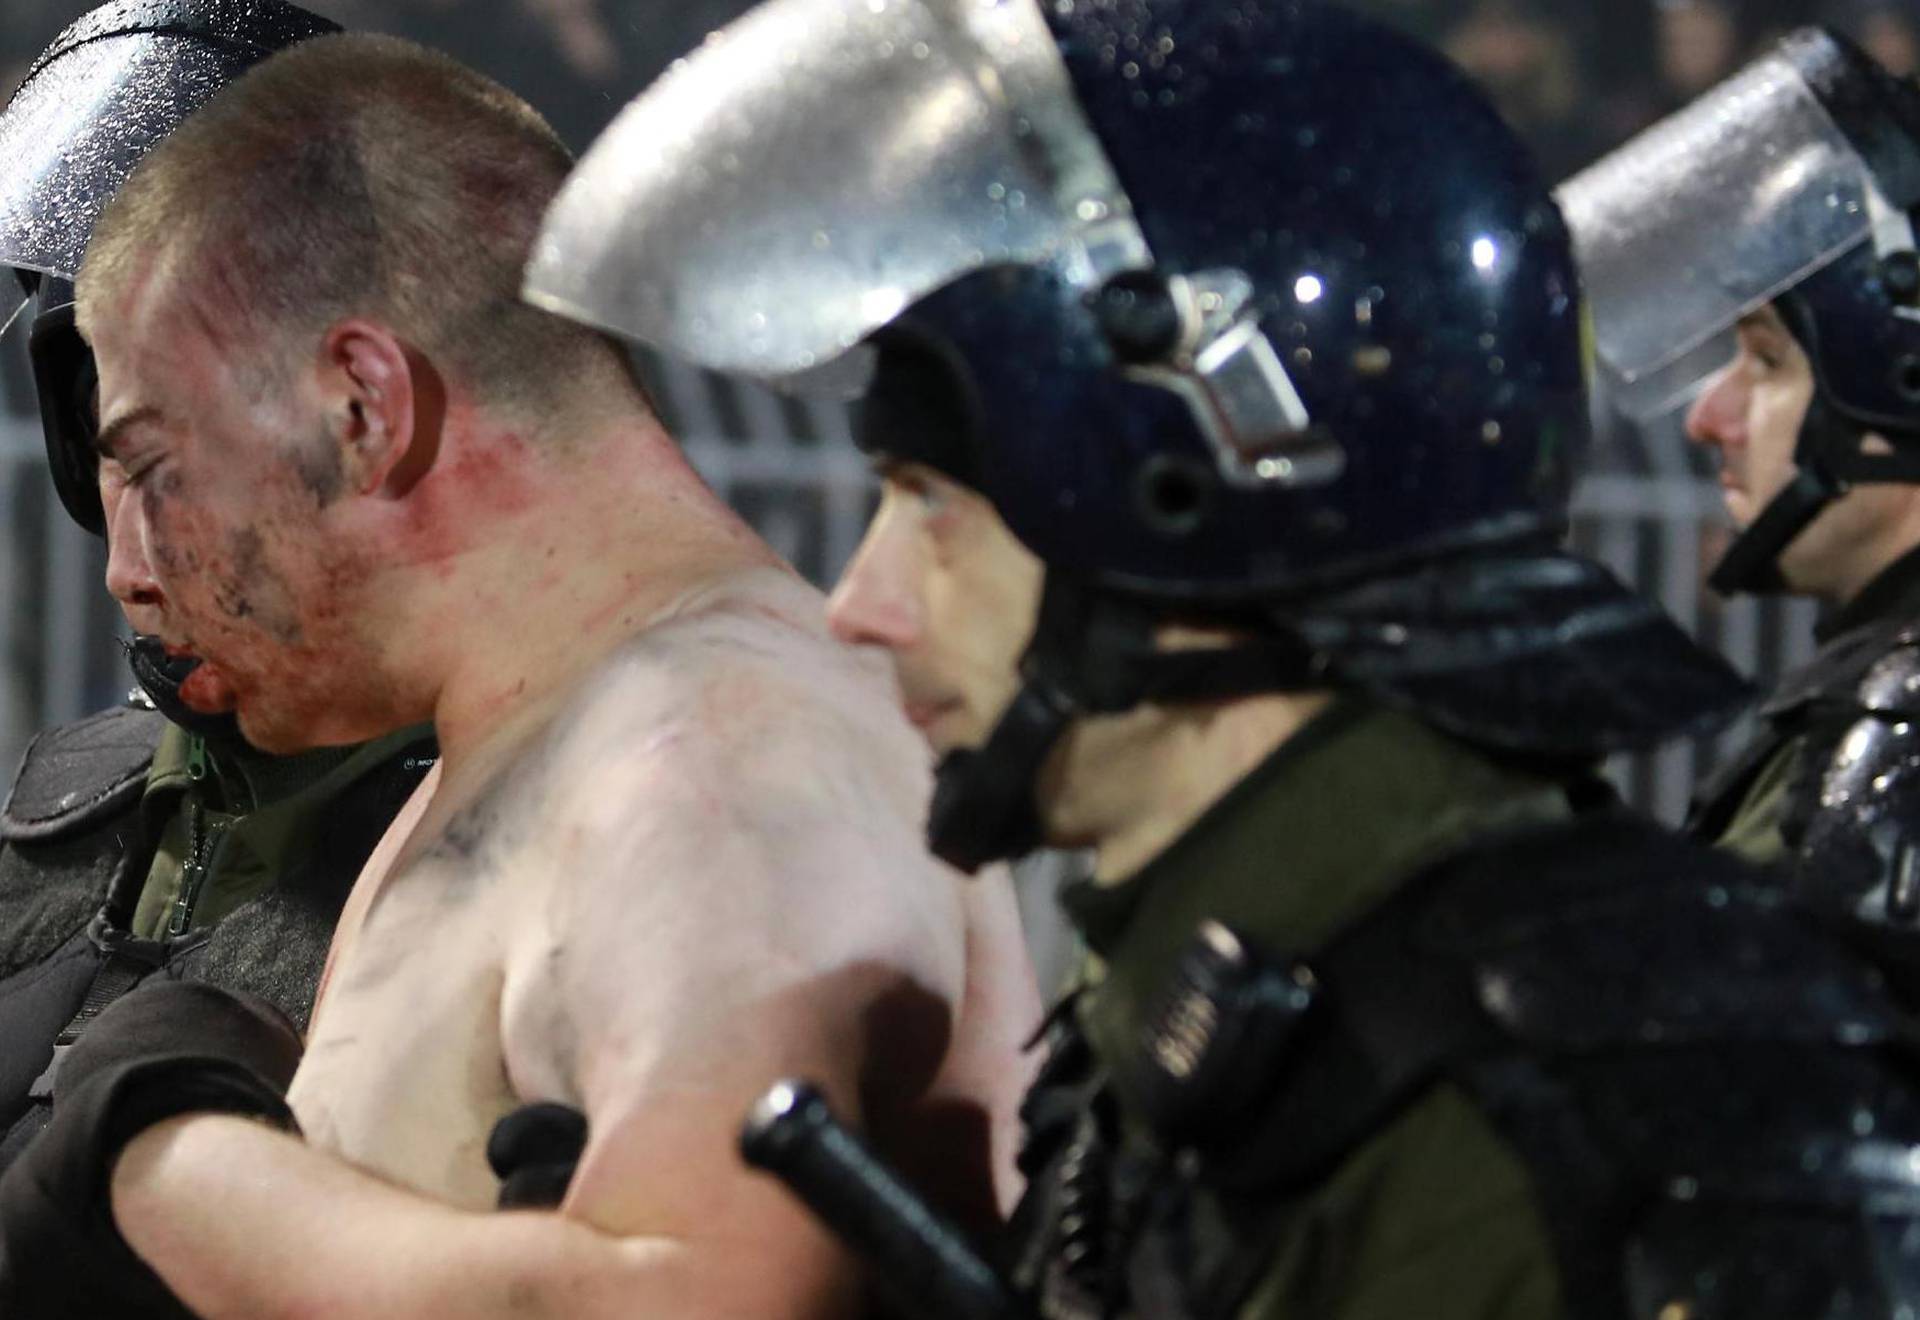 Police escort a soccer fan injured during the fights at a match between Red Star and Partizan in Belgrade